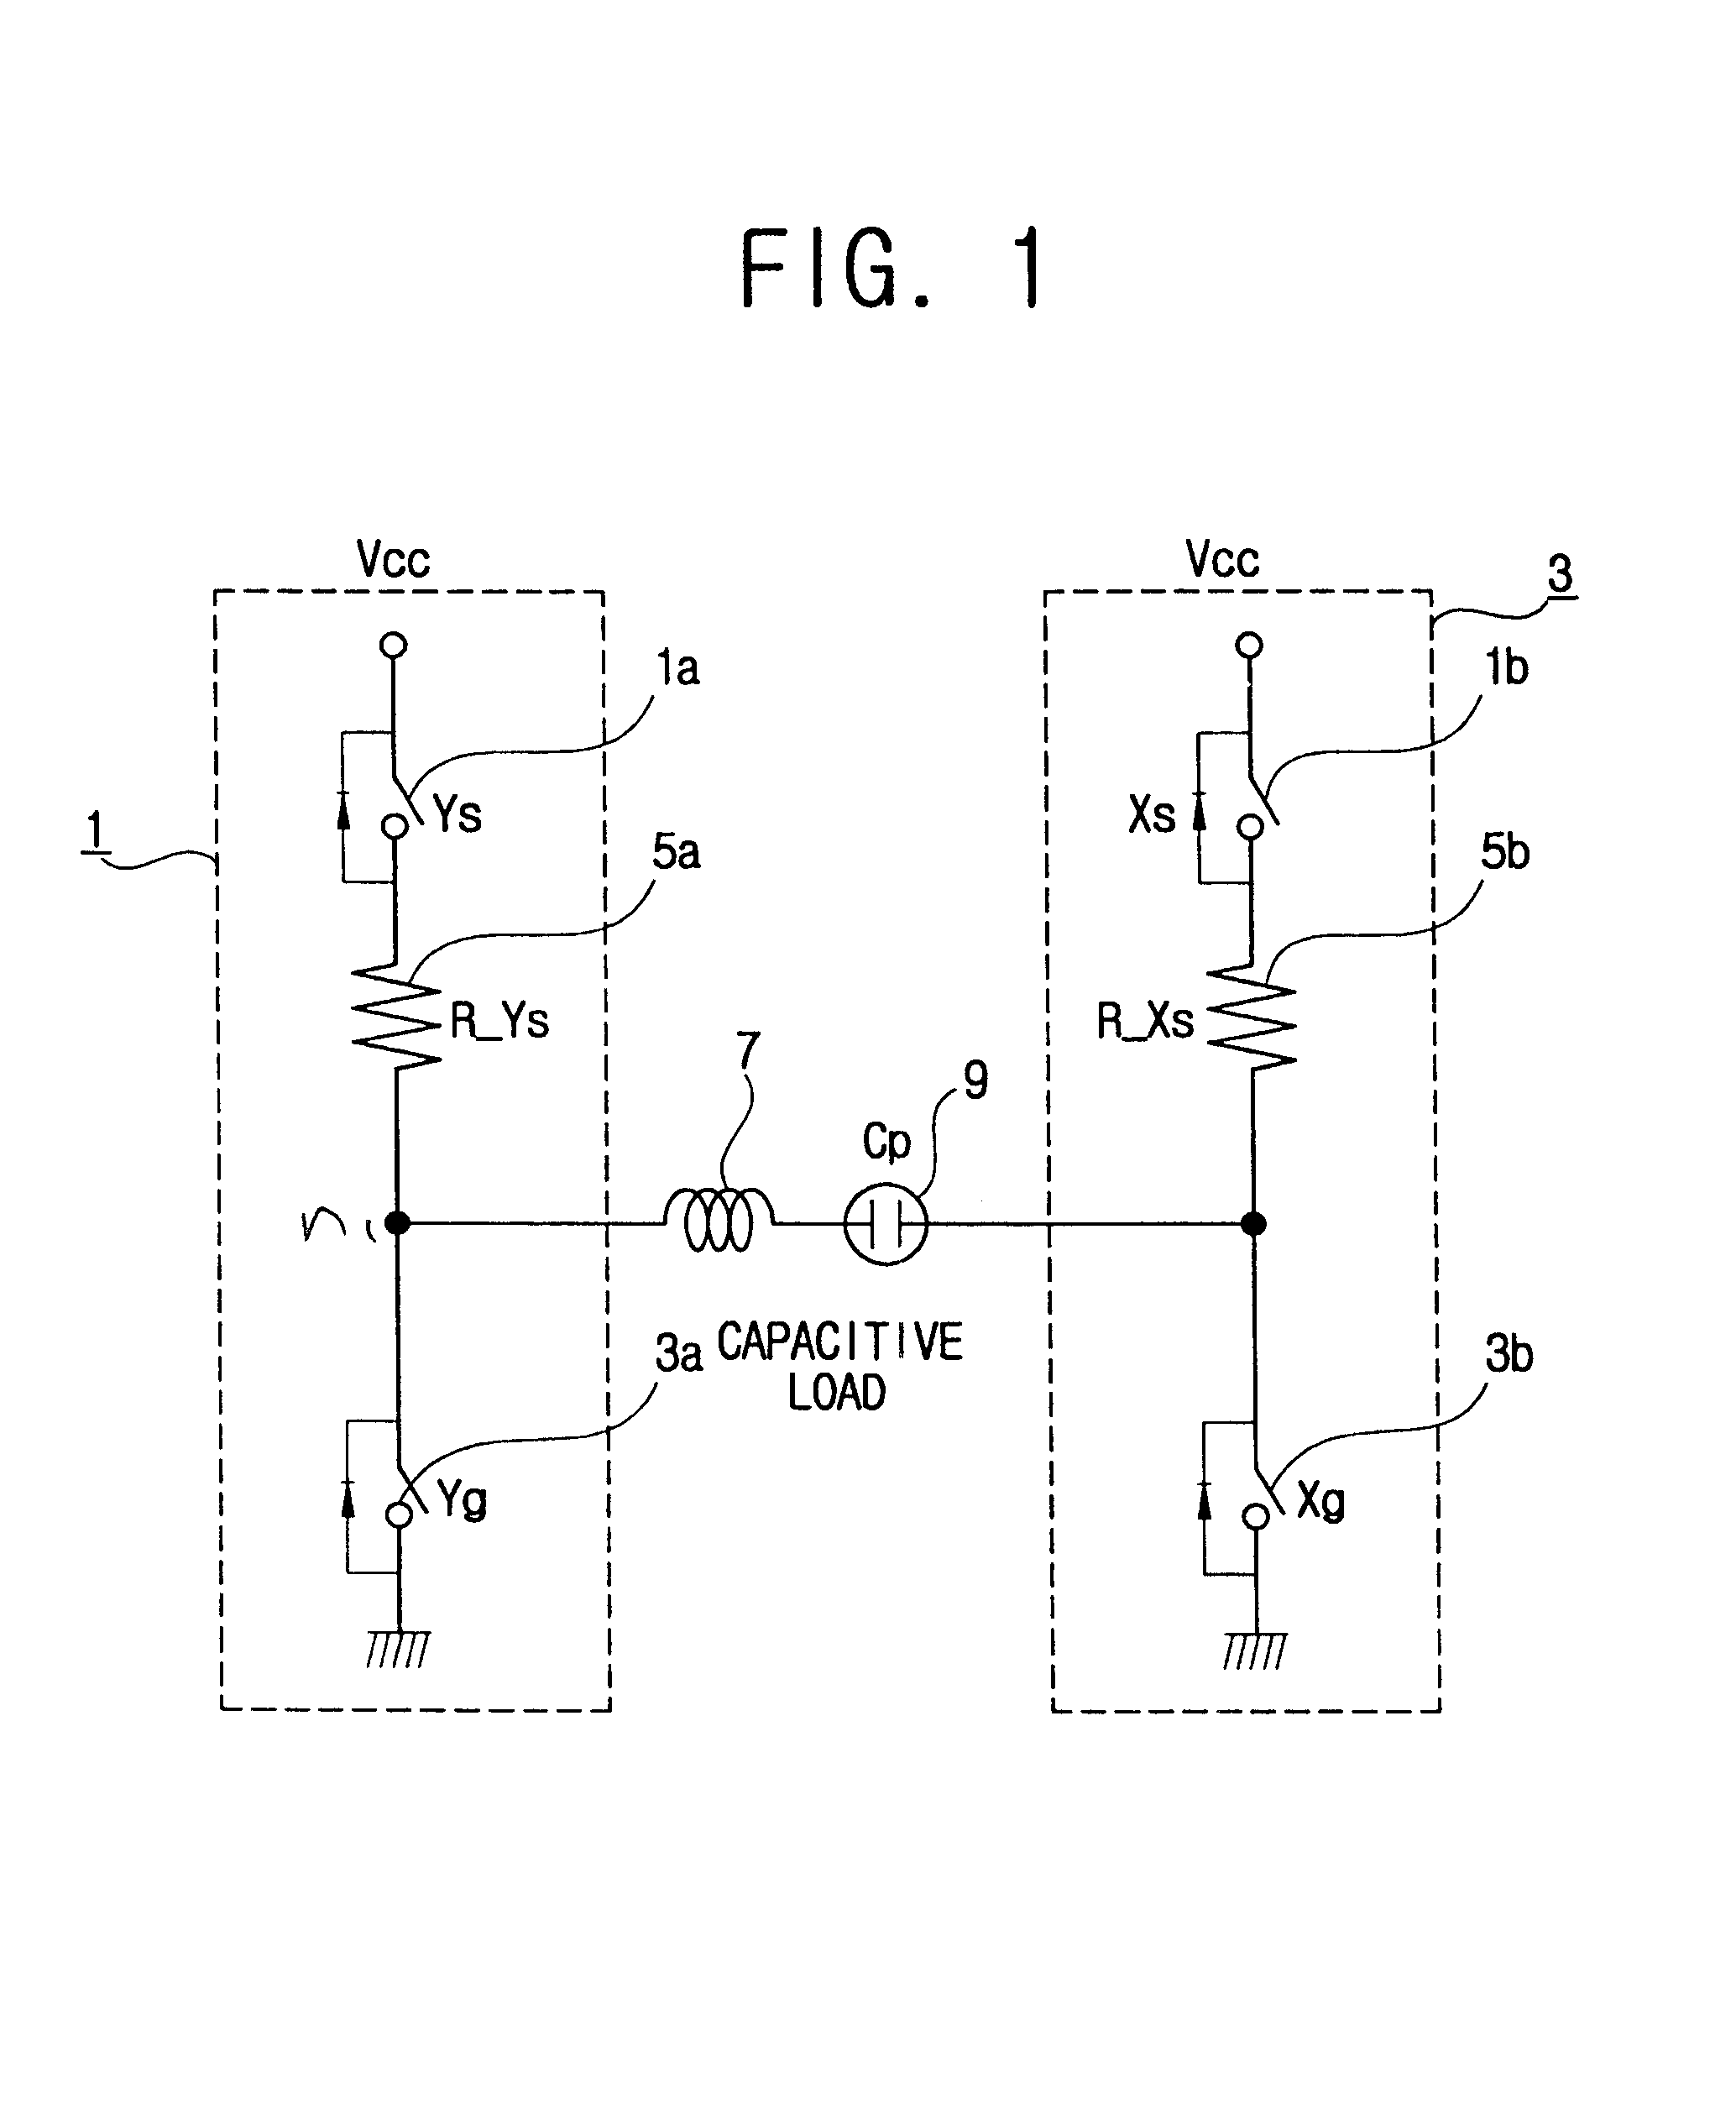 Apparatus and method of recovering reactive power of plasma display panel